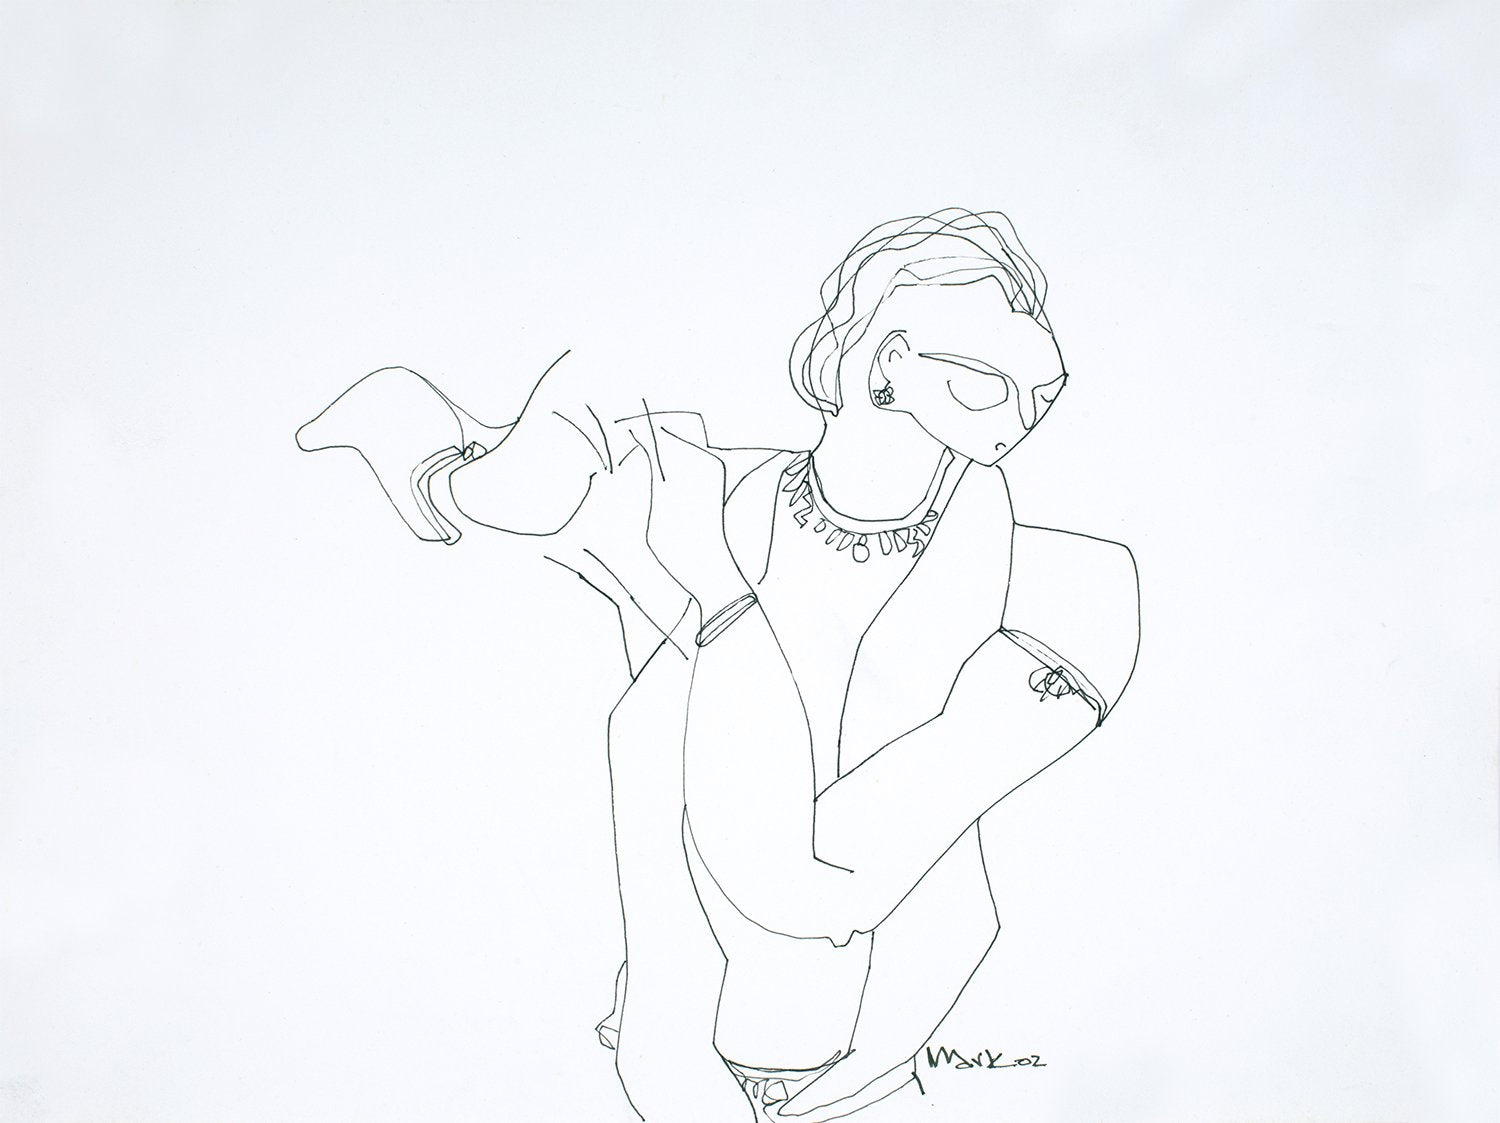 Performer 343|S. Mark Rathinaraj- Pen and Ink on Paper, , 10.5 x 10 inches